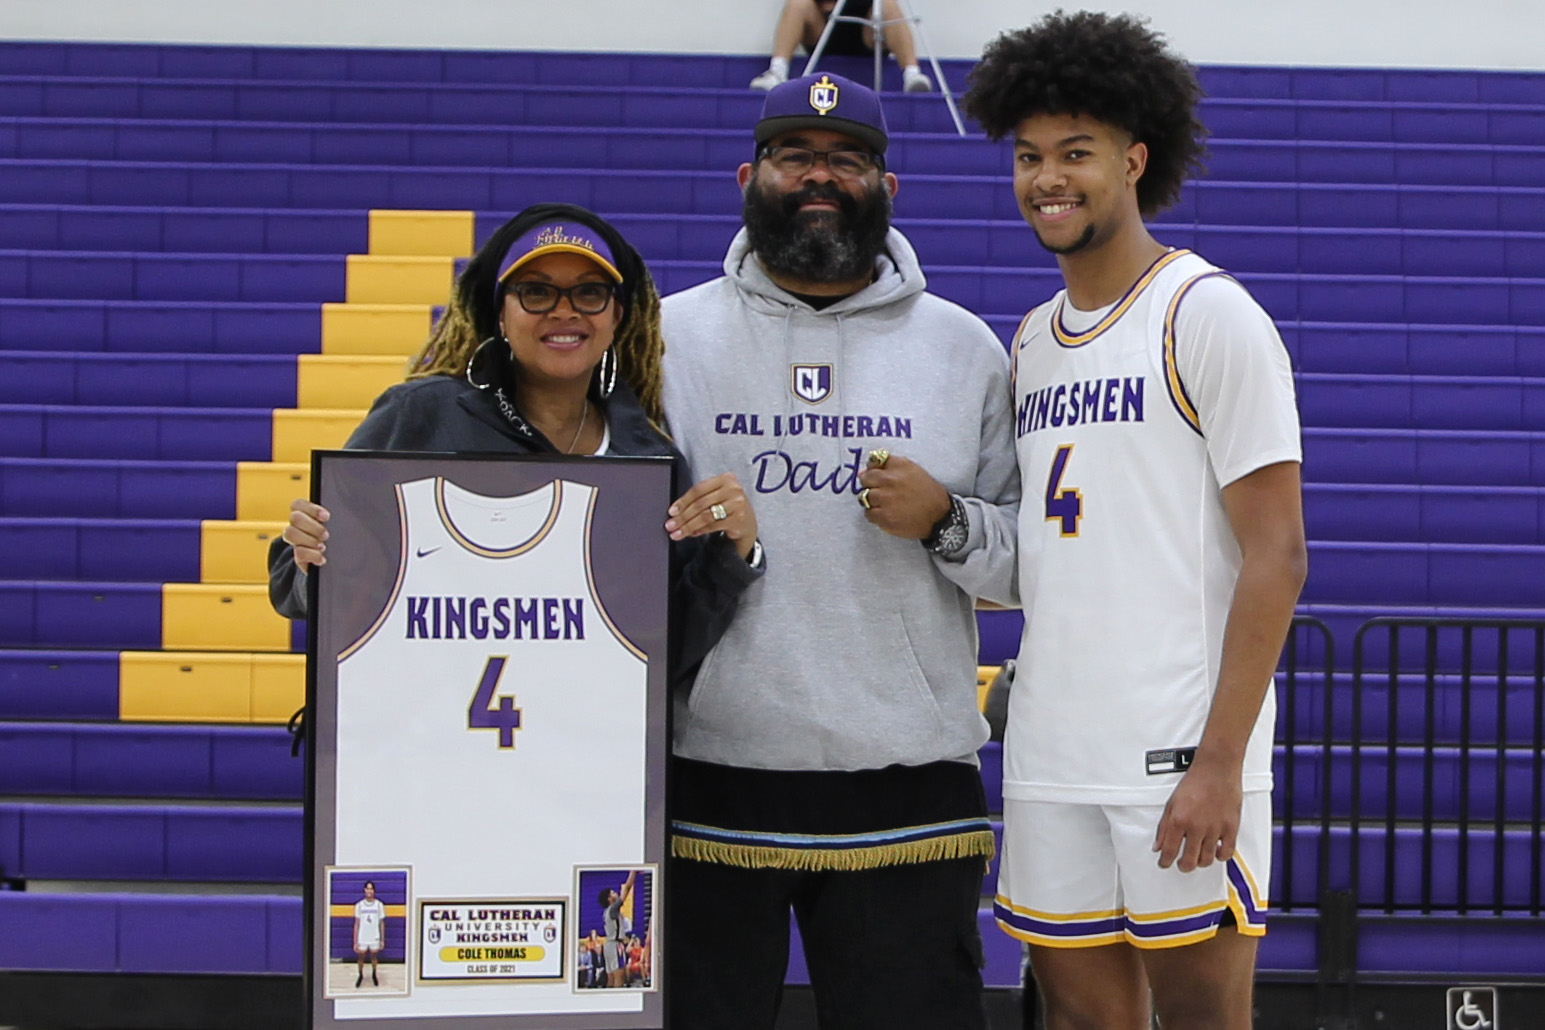 Cole Leads Kingsmen to Win on Senior Day